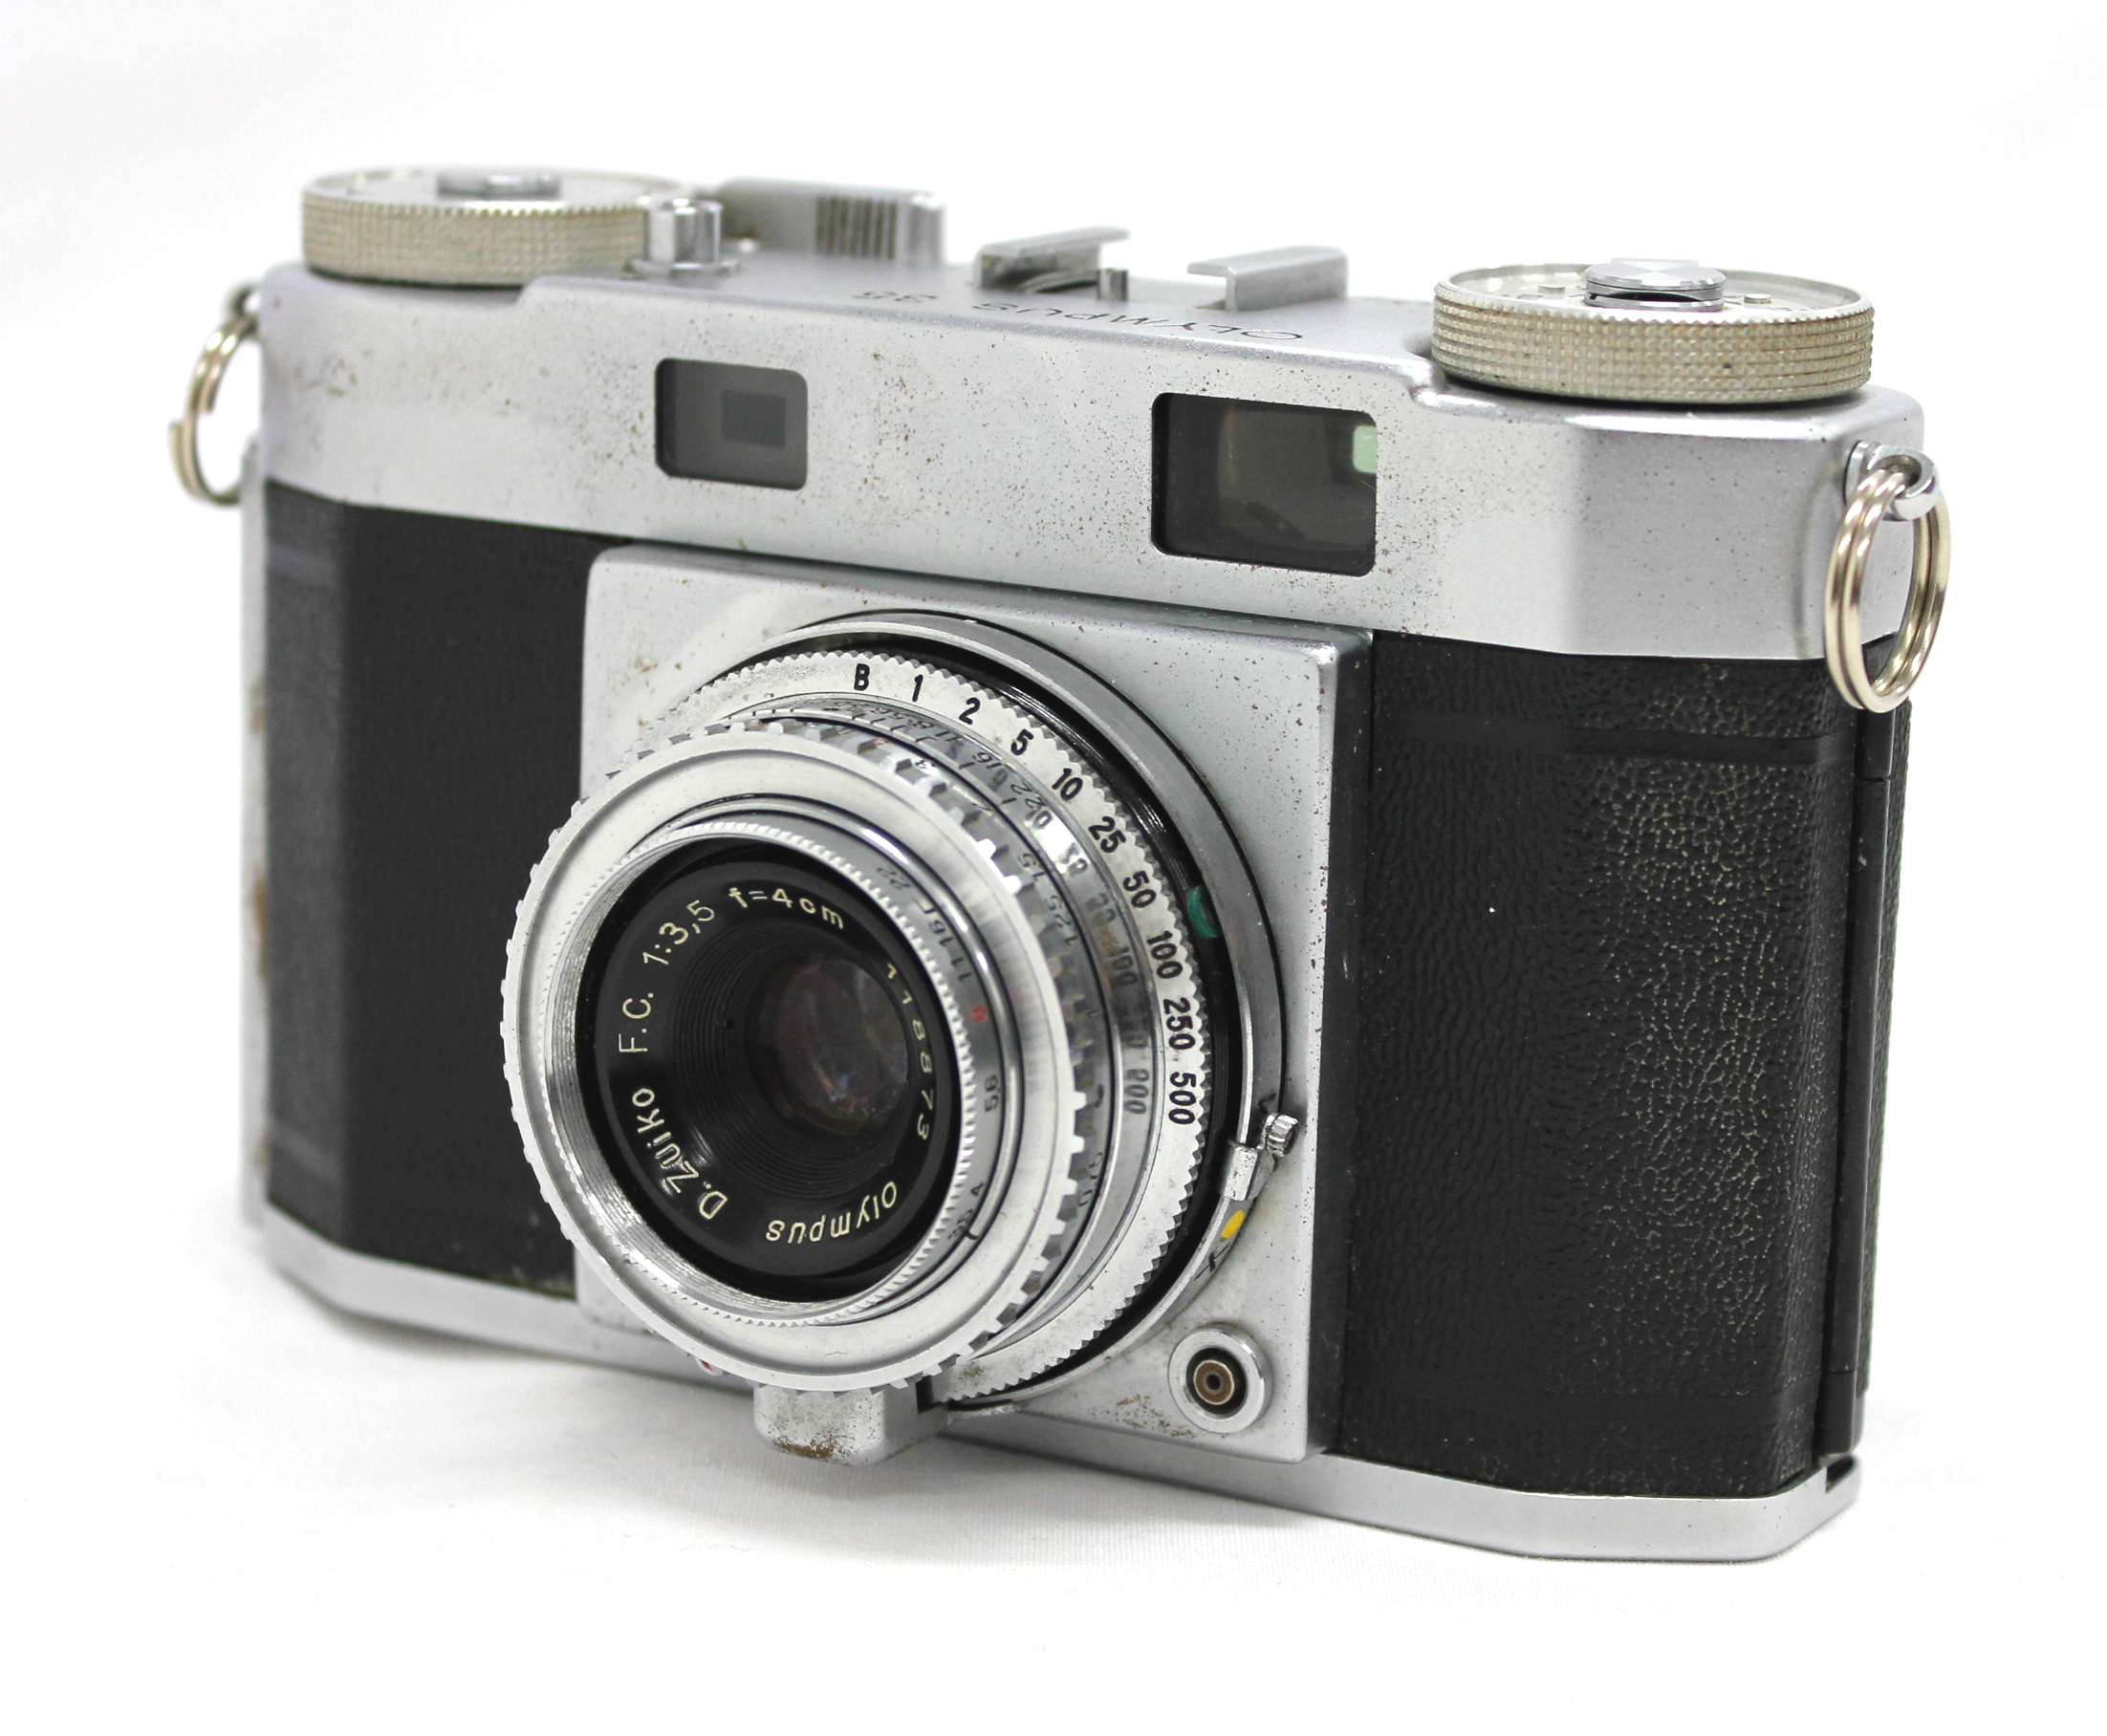 Japan Used Camera Shop | [Vintage] Olympus 35 Rangefinder Film Camera with D.Zuiko F.C. 40mm F3.5 Lens and Copal Shutter from Japan 